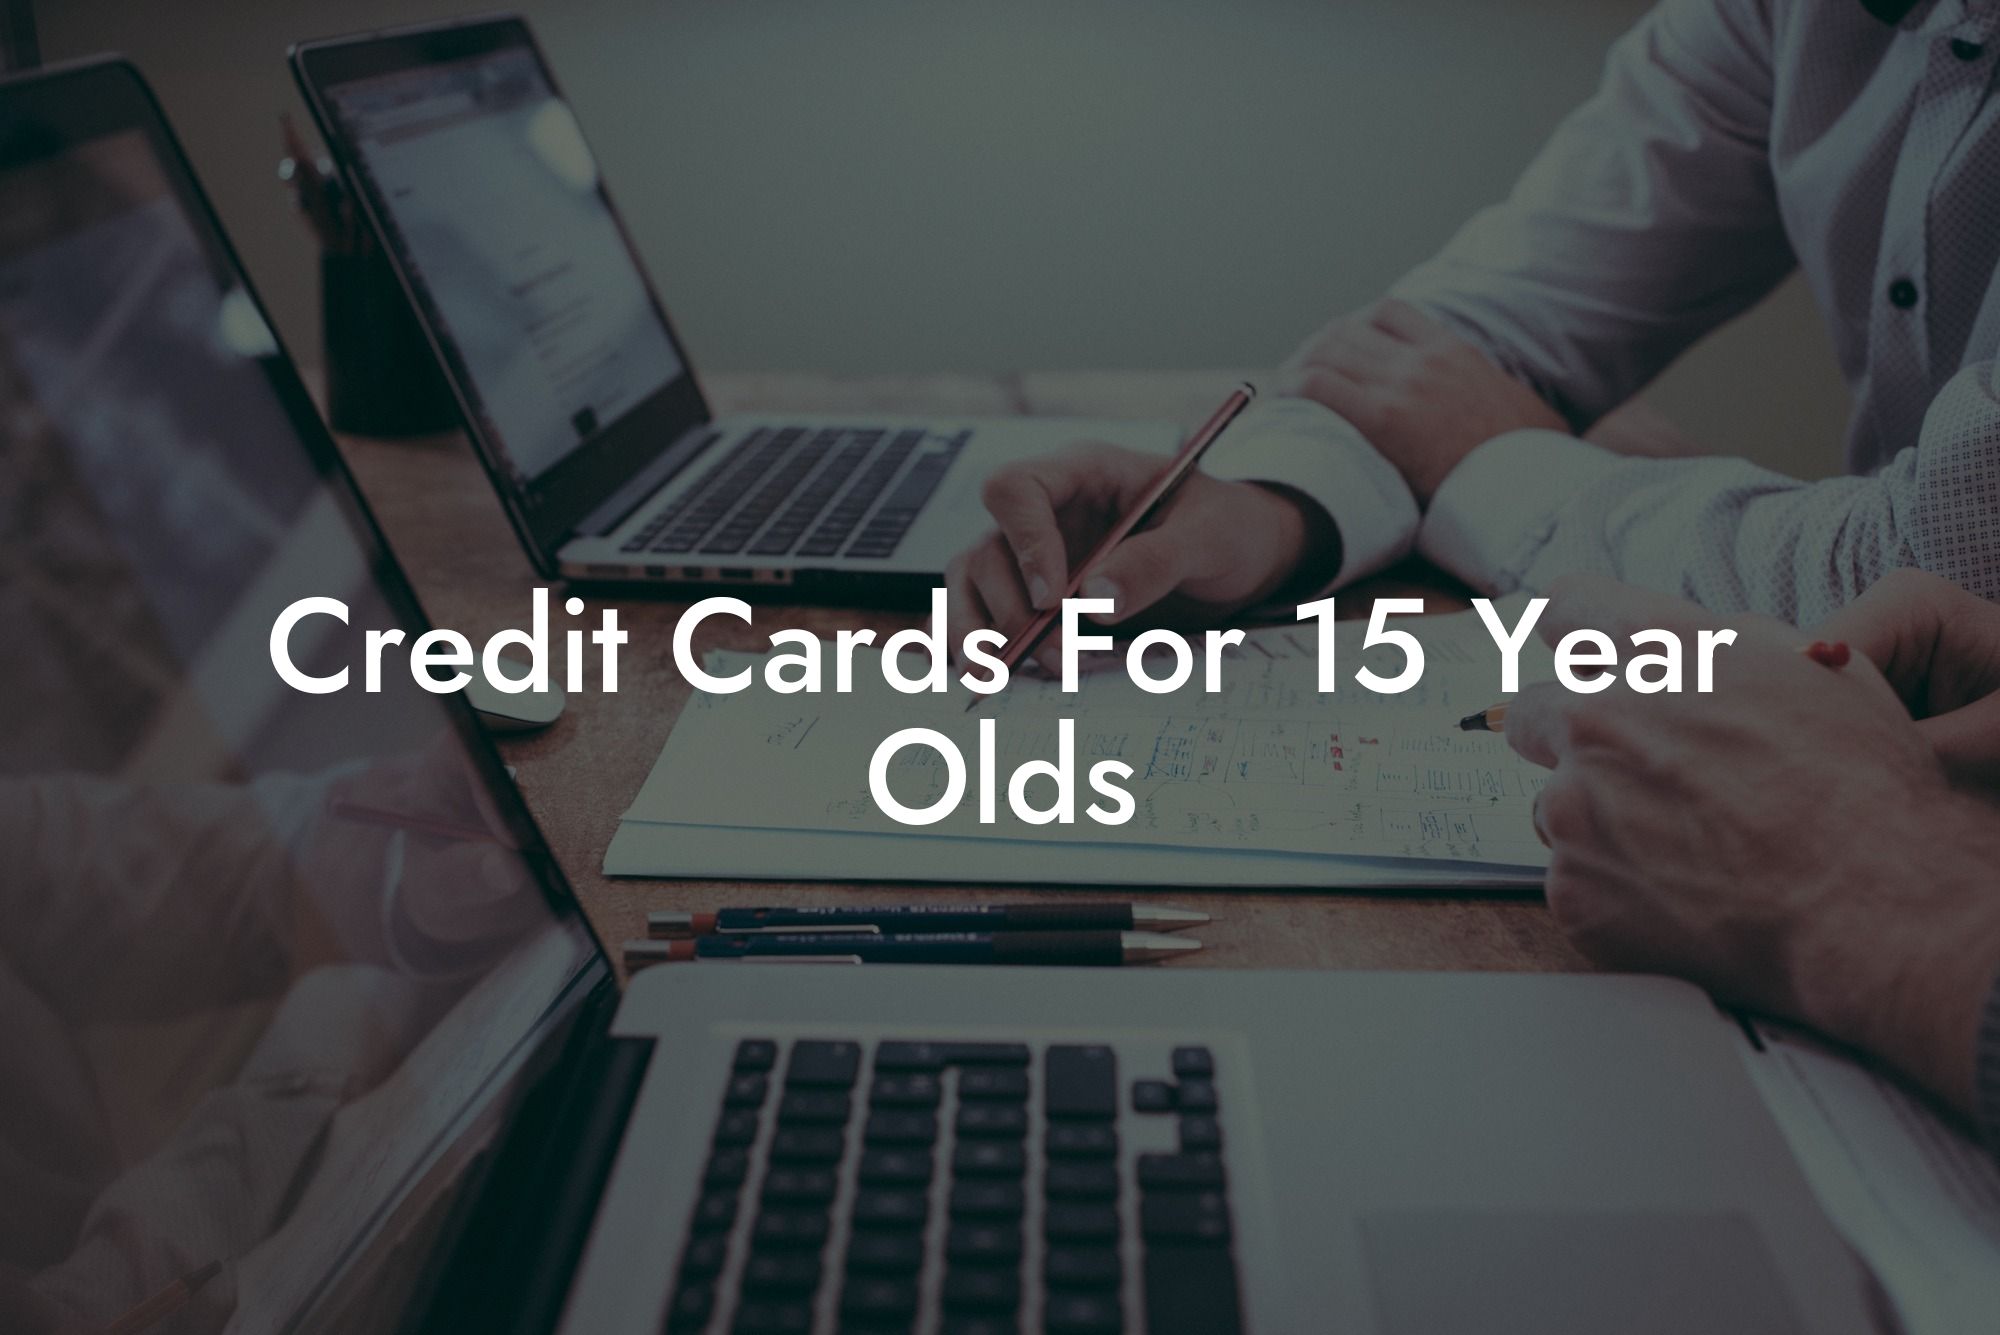 Credit Cards For 15 Year Olds